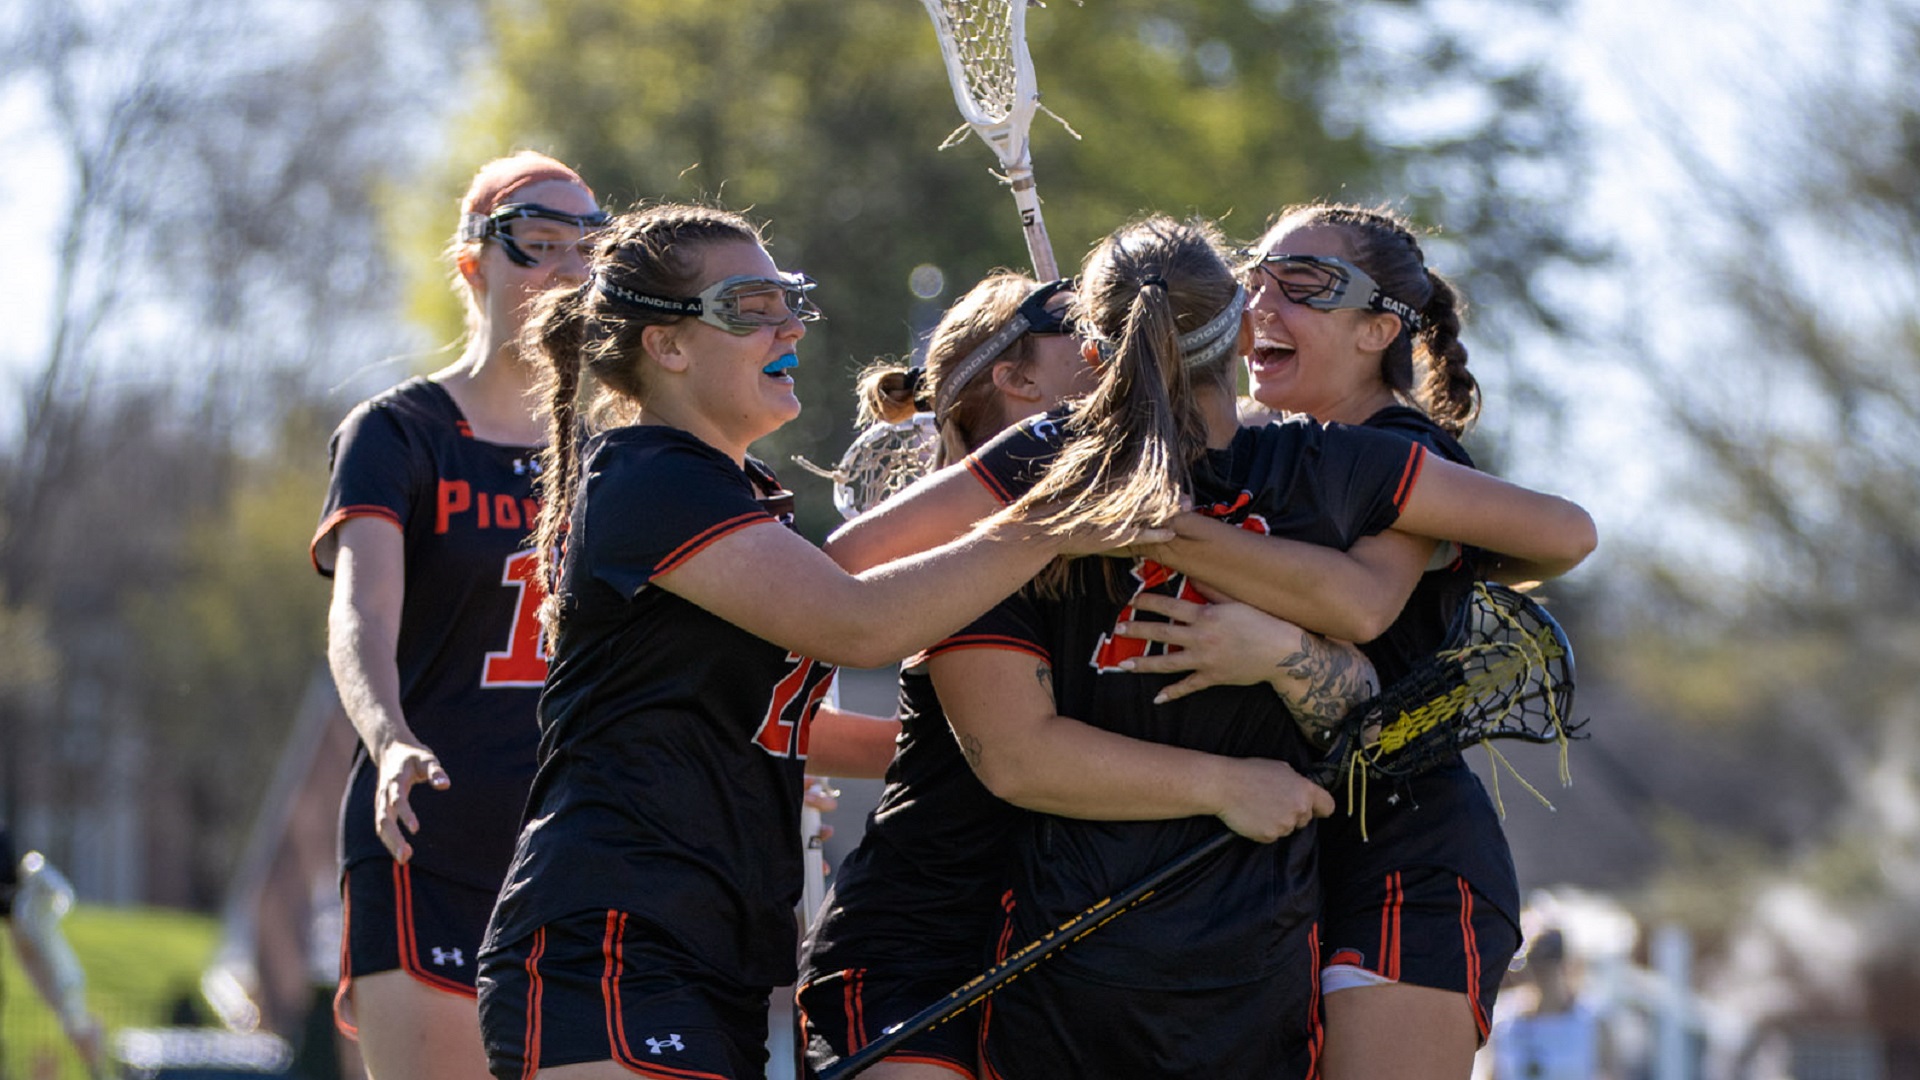 One of 24 goal celebrations by the Pioneers against Emory & Henry (photo by Kari Ham)